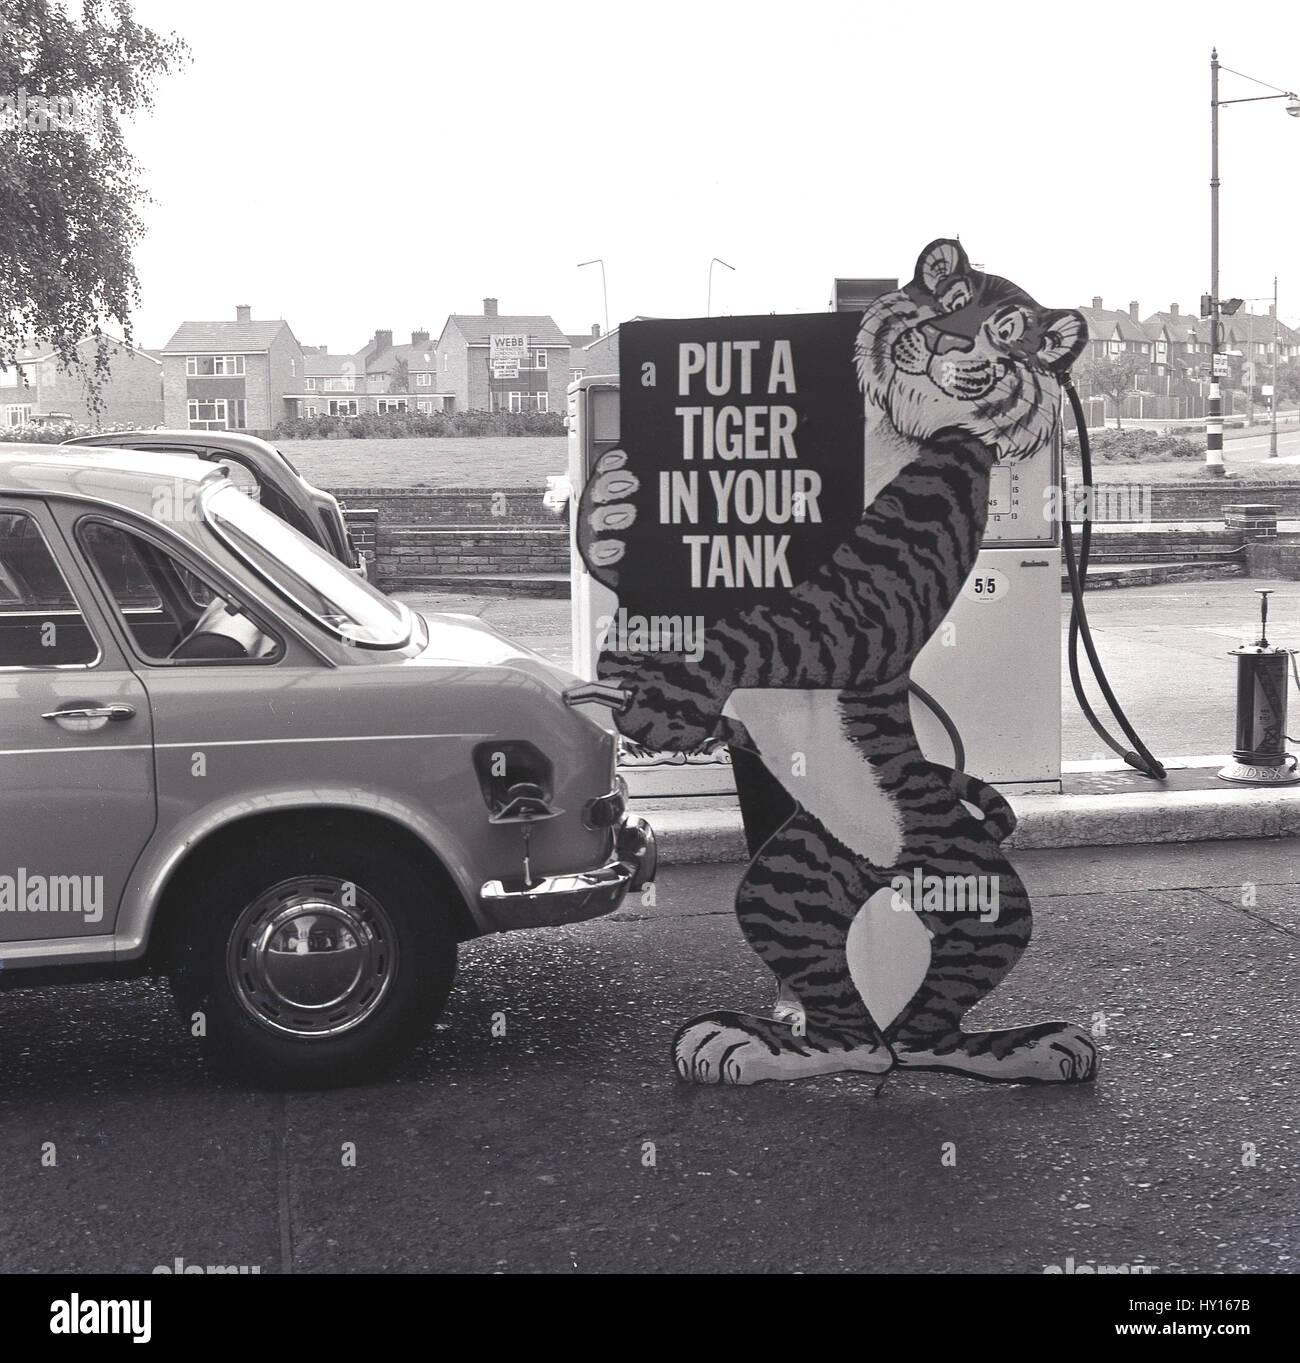 1960s, historical, garage forecourt sales display for Esso fuel, 'Put A Tiger In Your Tank', England. Designed to promote Esso as being powerful fuel, a beast  in your engine. Stock Photo